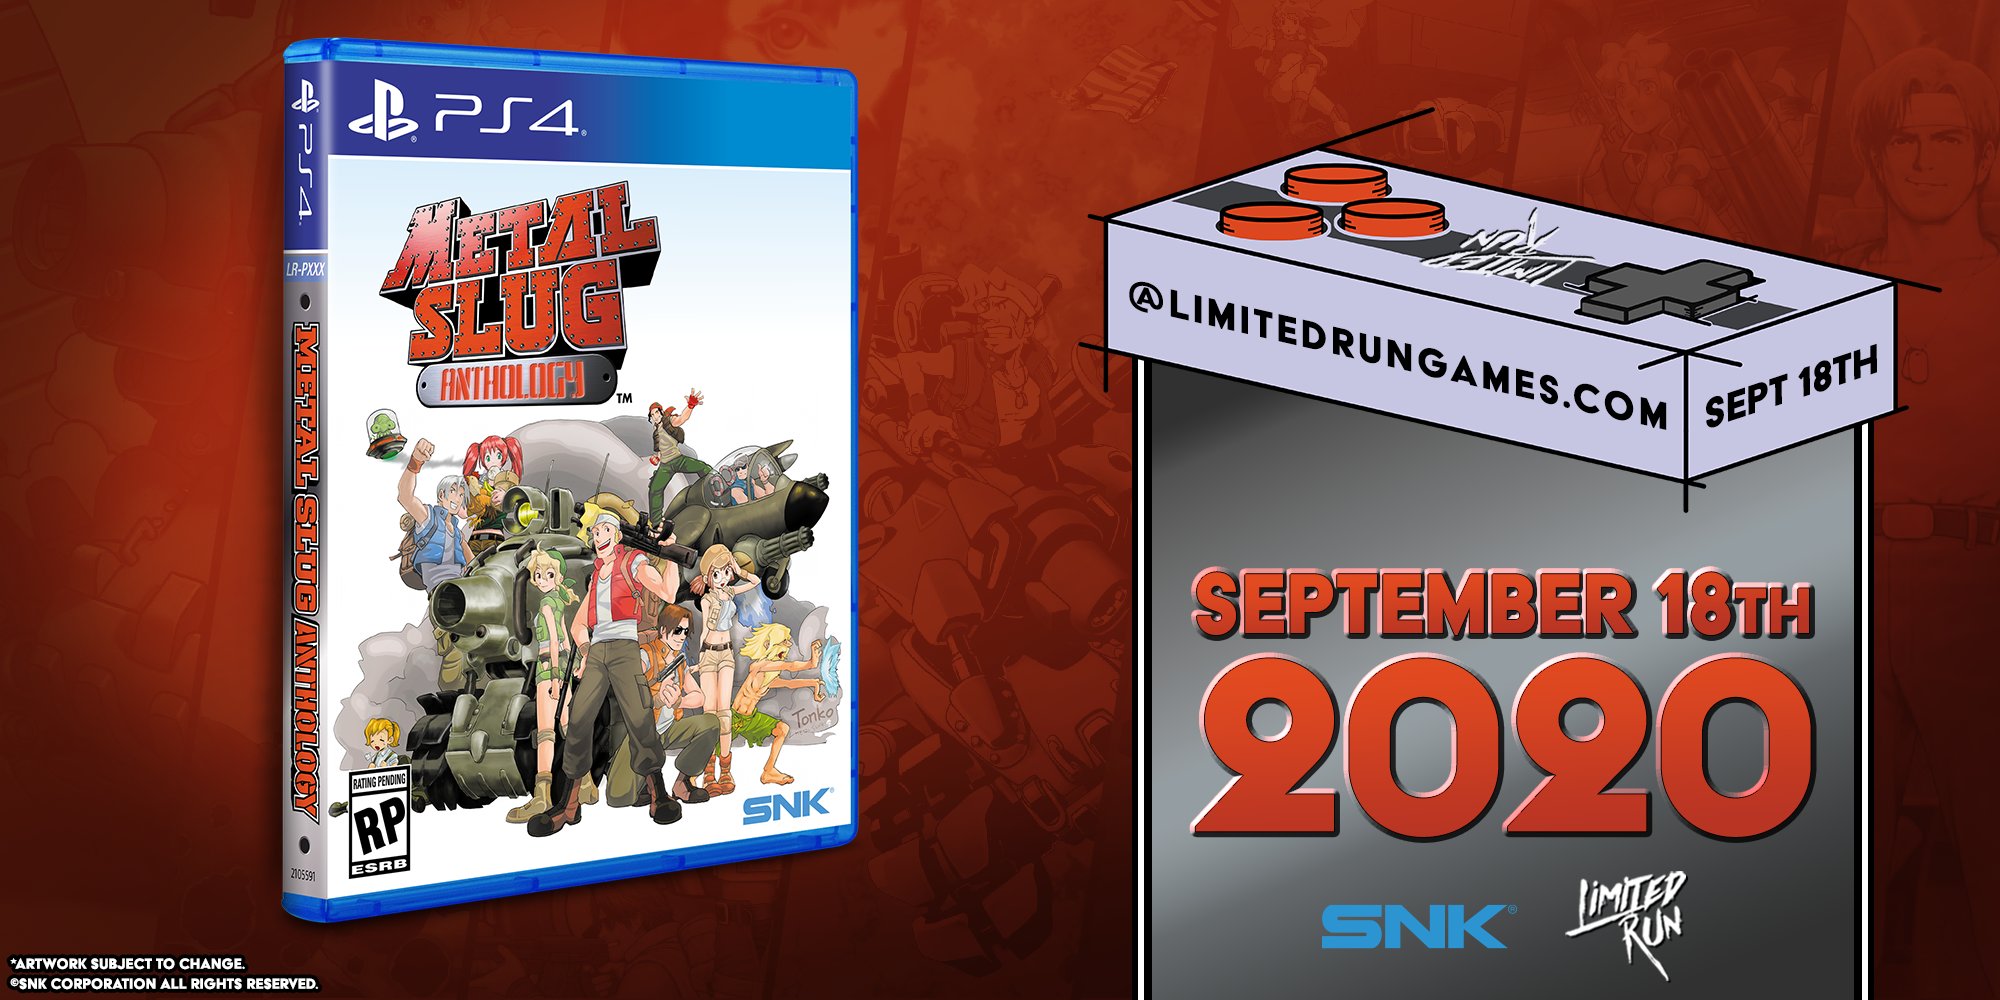 Nerve skadedyr pinion Limited Run Games on Twitter: "It's time... the final batch of METAL SLUG  ANTHOLOGY for the PS4 is now live on https://t.co/5Lksol4sqo! These  physical copies are available in limited quantity, so get